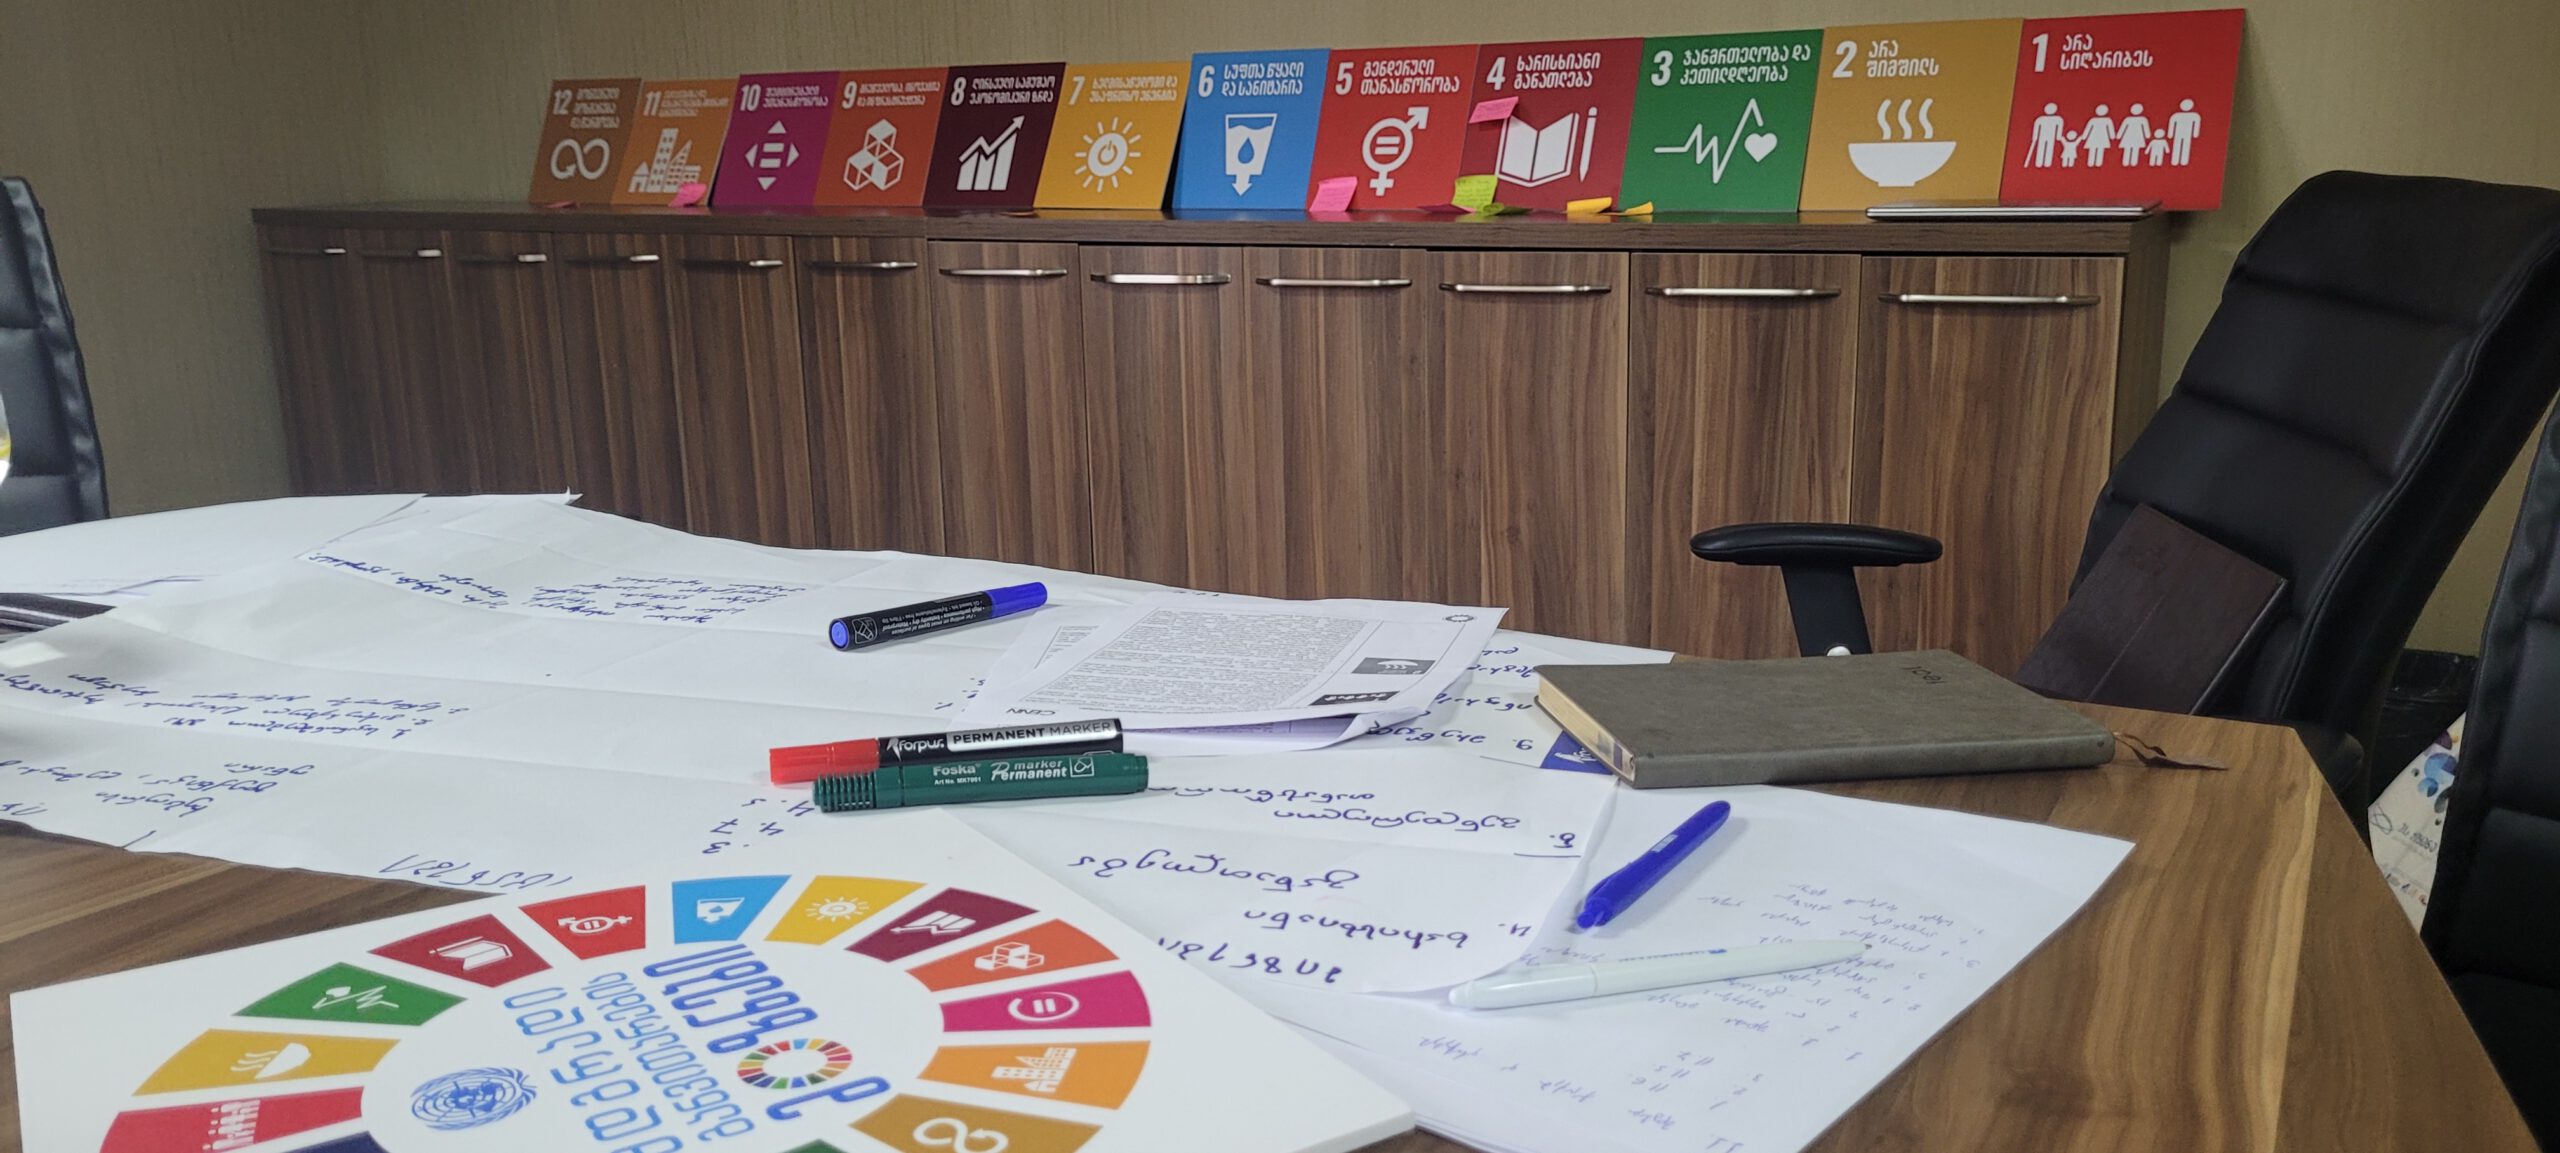 CENN, in cooperation with the SDG Secretariat and with the financial support of the German Government, supports municipalities in developing local SDG priority documents